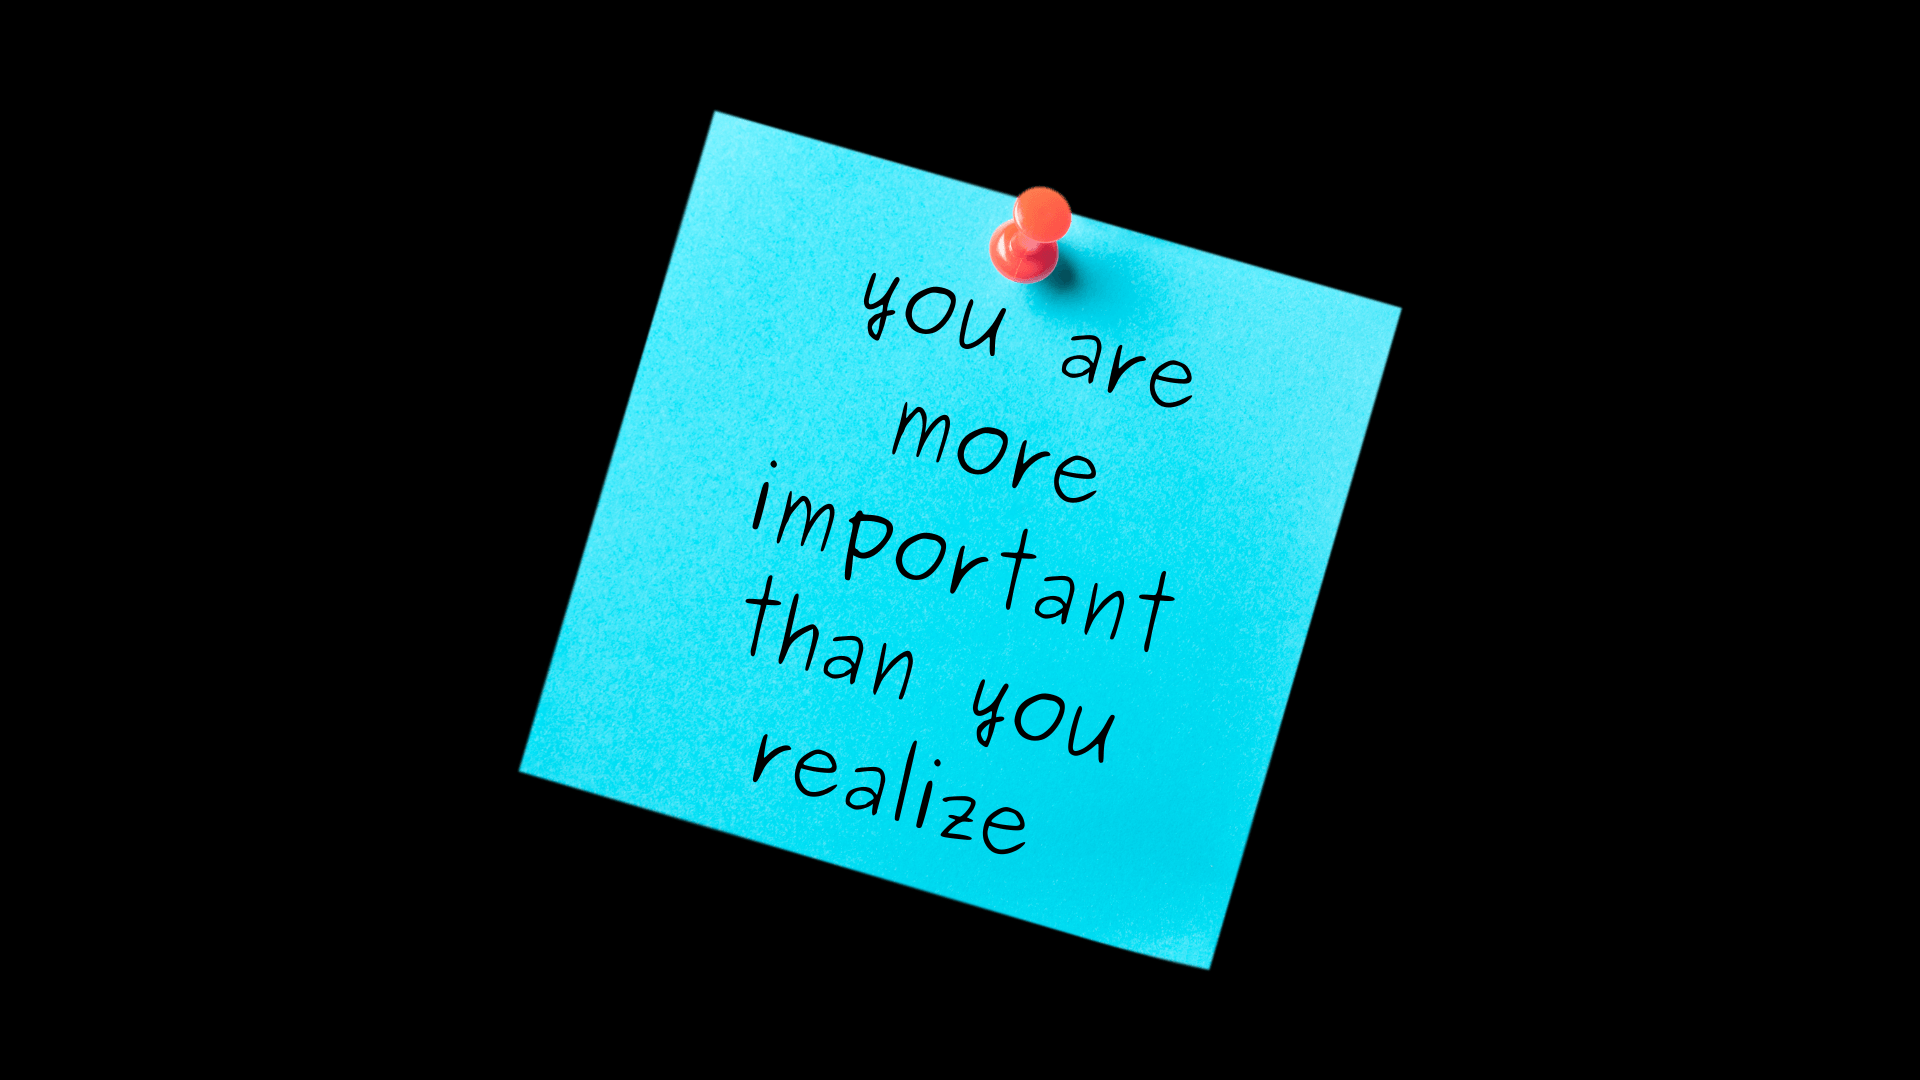 post it note says you are more important than you realize